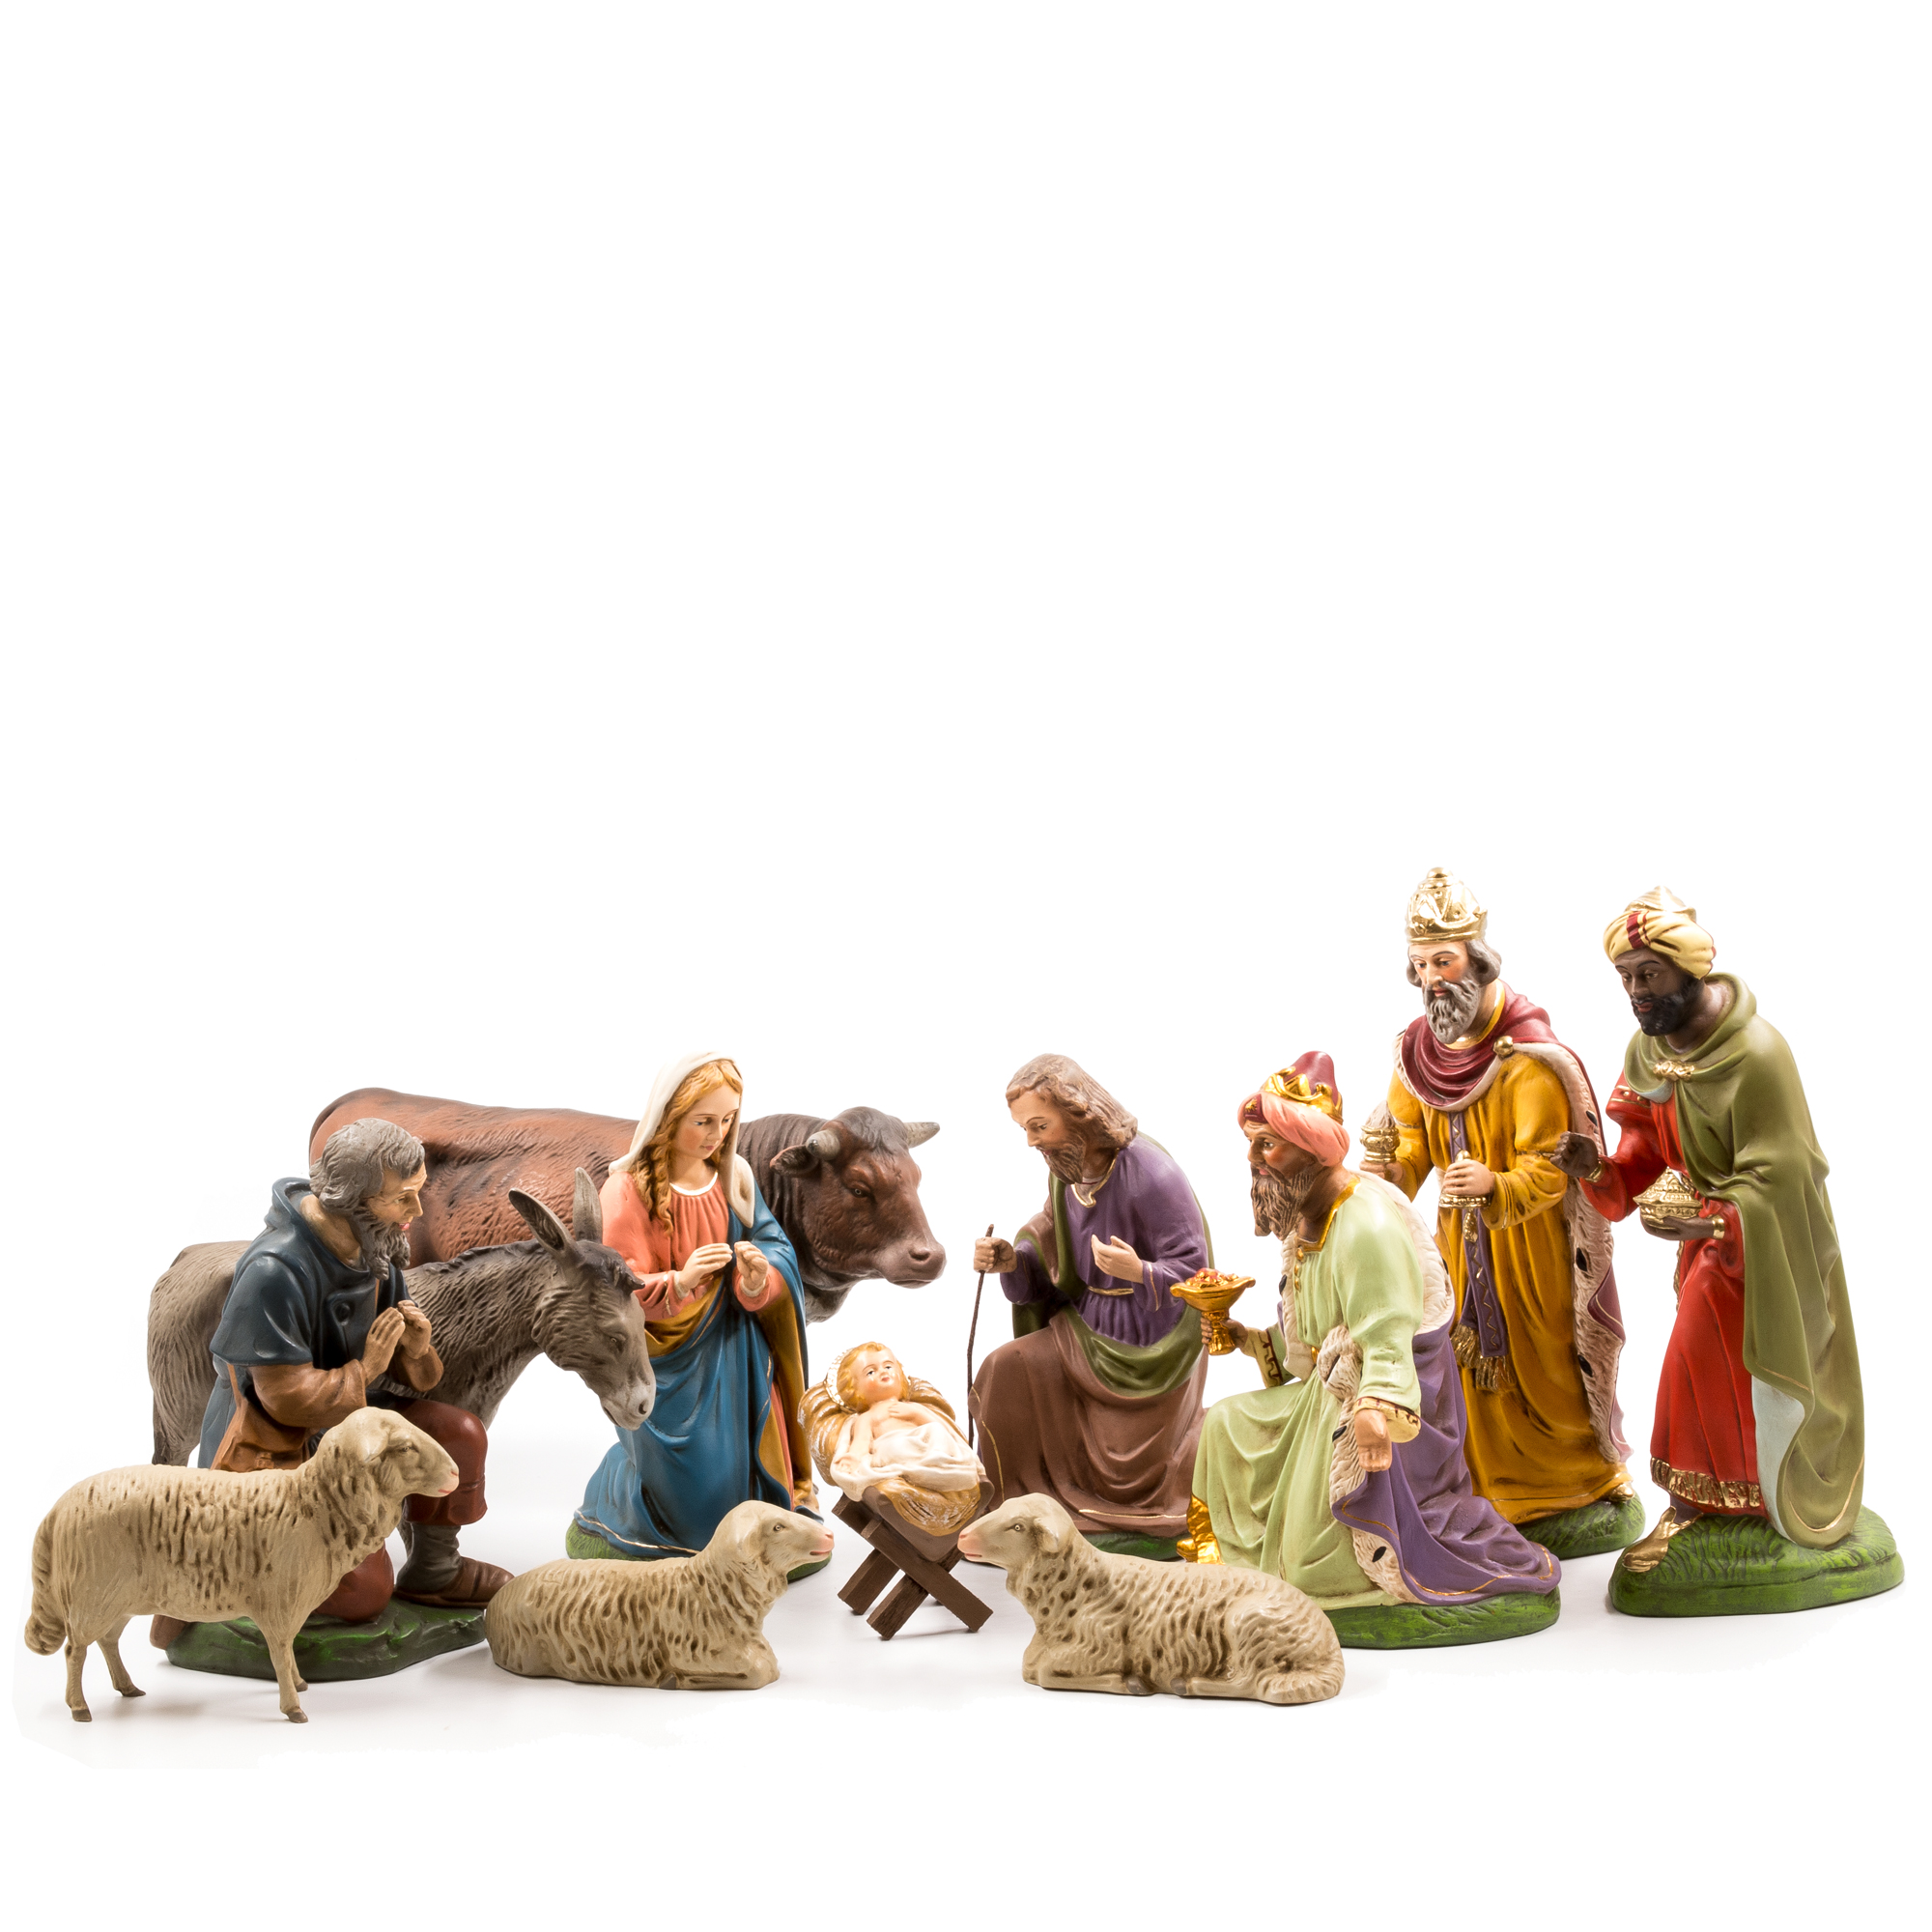 Nativity set with 12 figures, to 8.5 in. figures size